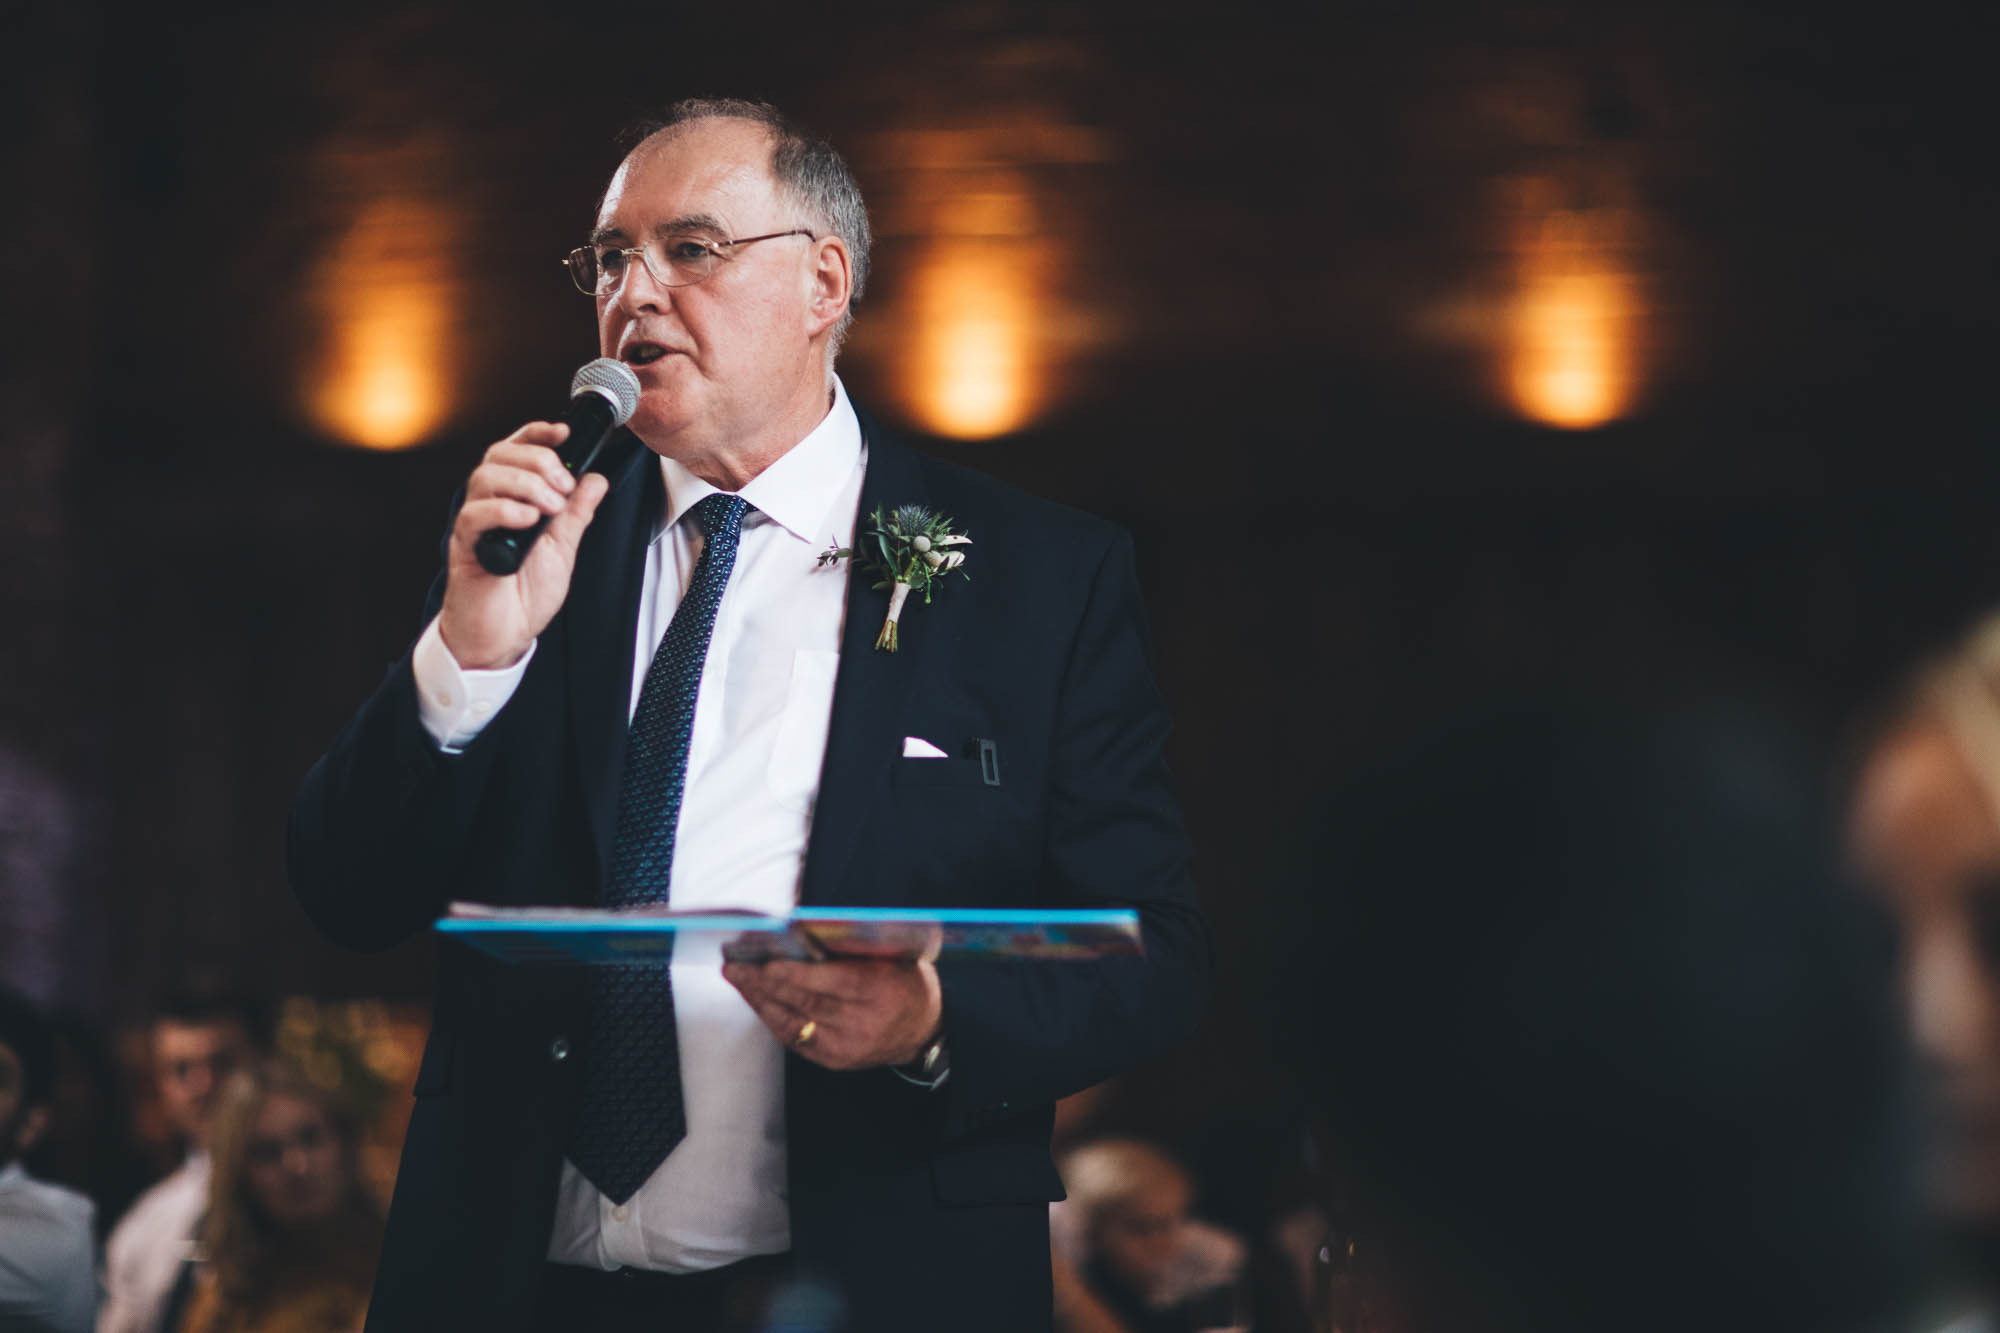 Father of Bride reads from children's book at wedding speech